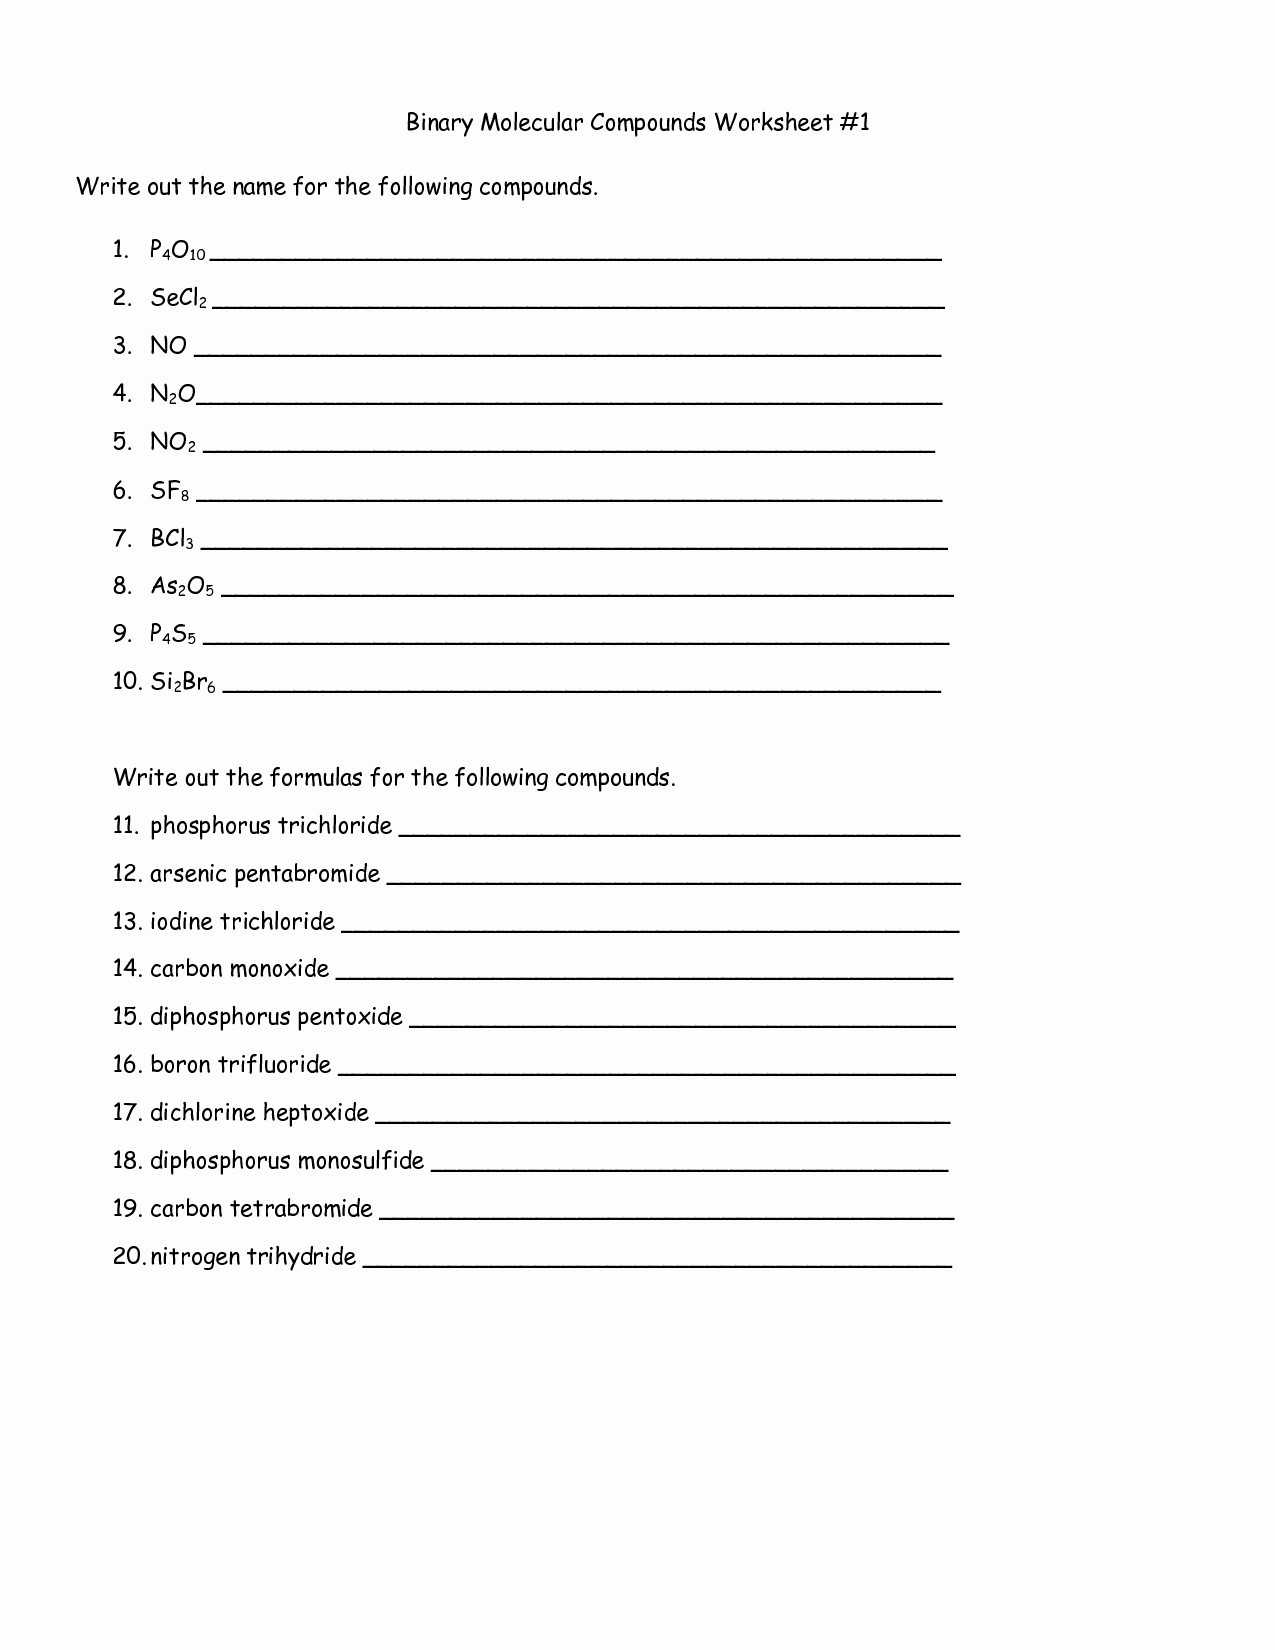 Ions and Ionic Compounds Worksheet Answer Key Along with Writing Chemical formulas for Binary Ionic Pounds Worksheet